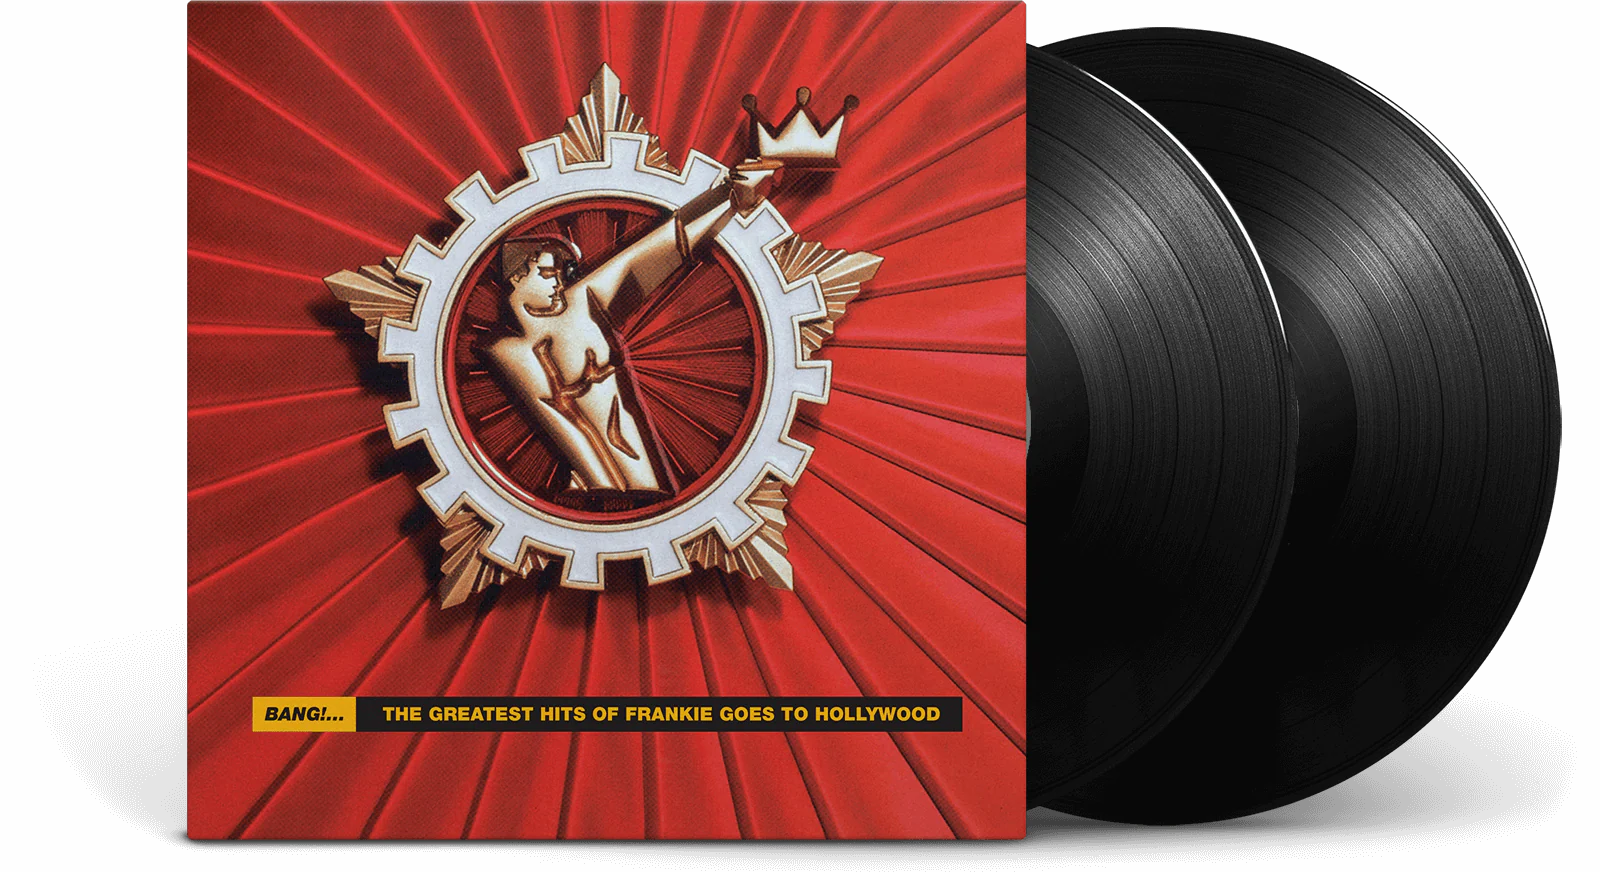 Frankie Goes To Hollywood – Bang!...The Greatest Hits Of Frankie Goes To Hollywood 2LP